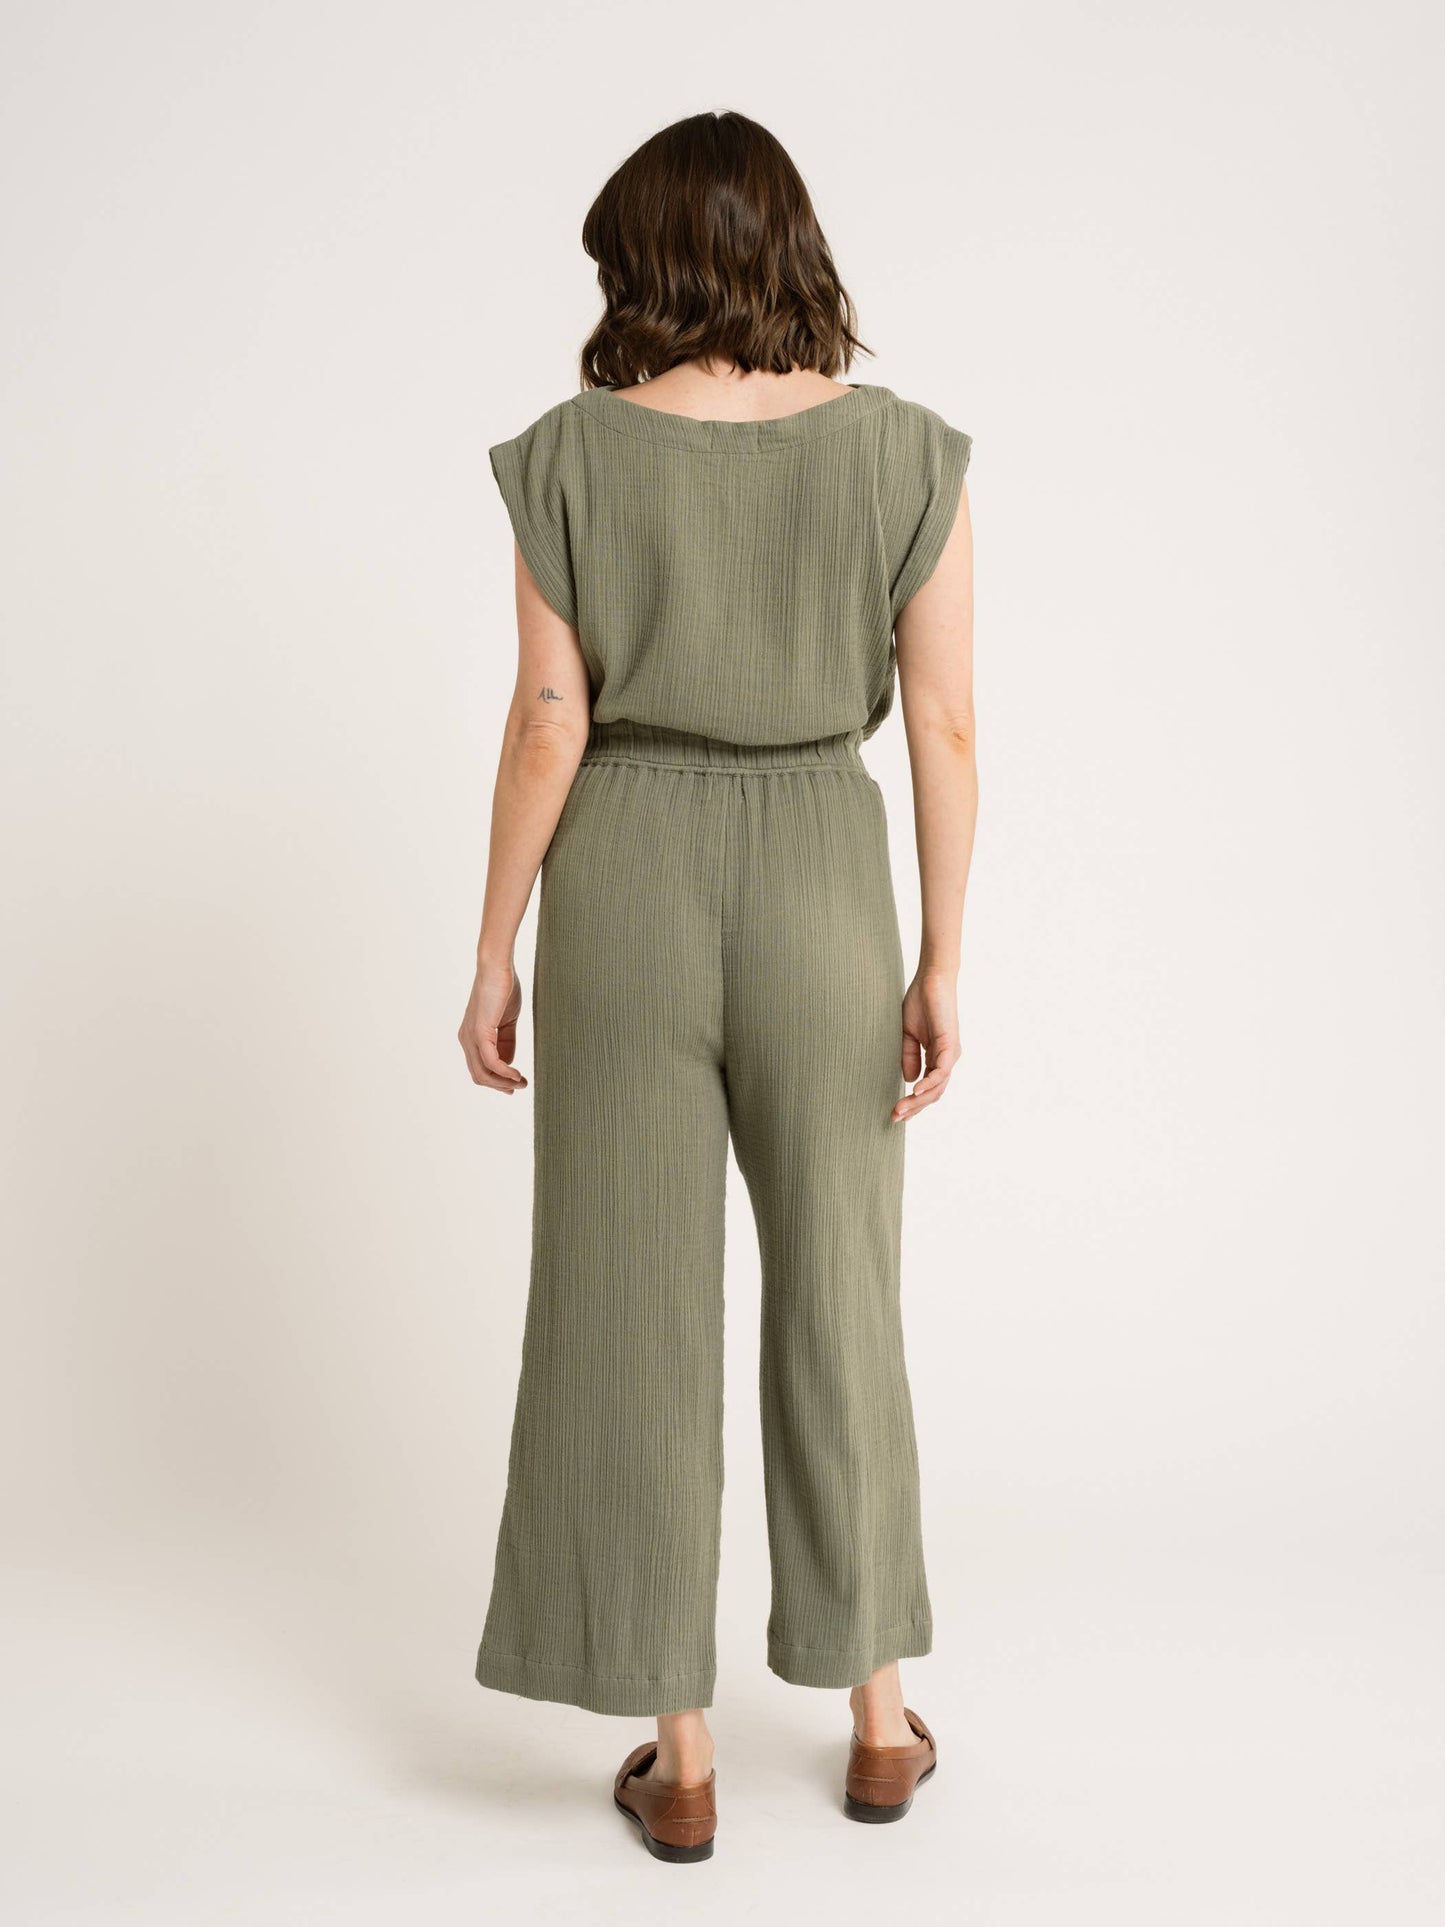 Laude the Label's best-selling pant, complete with a high-waisted fit and cropped, wide-leg. A cool, casual feel courtesy of our luxurious slub cotton fabric. The fully-elastic waistband offers comfort for all-day wear.